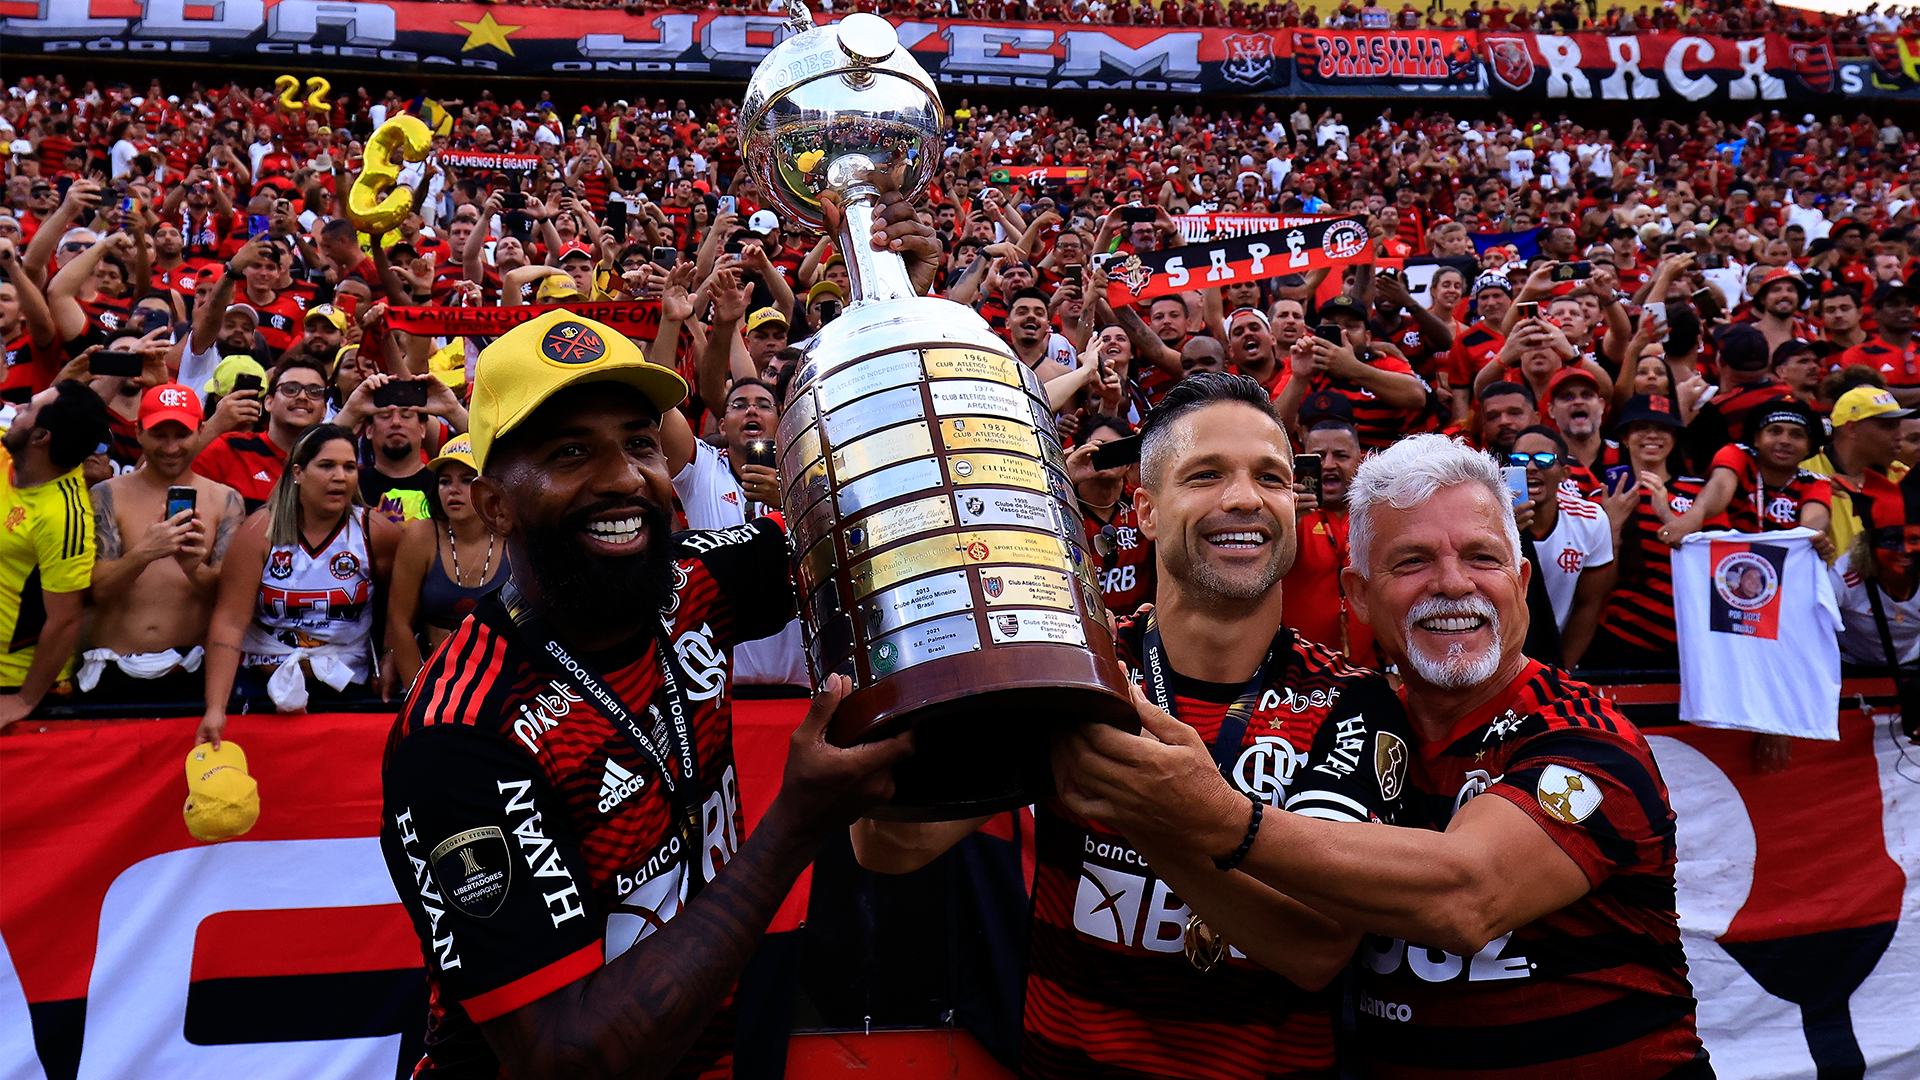 Copa Libertadores remaining teams best perfomances in the history